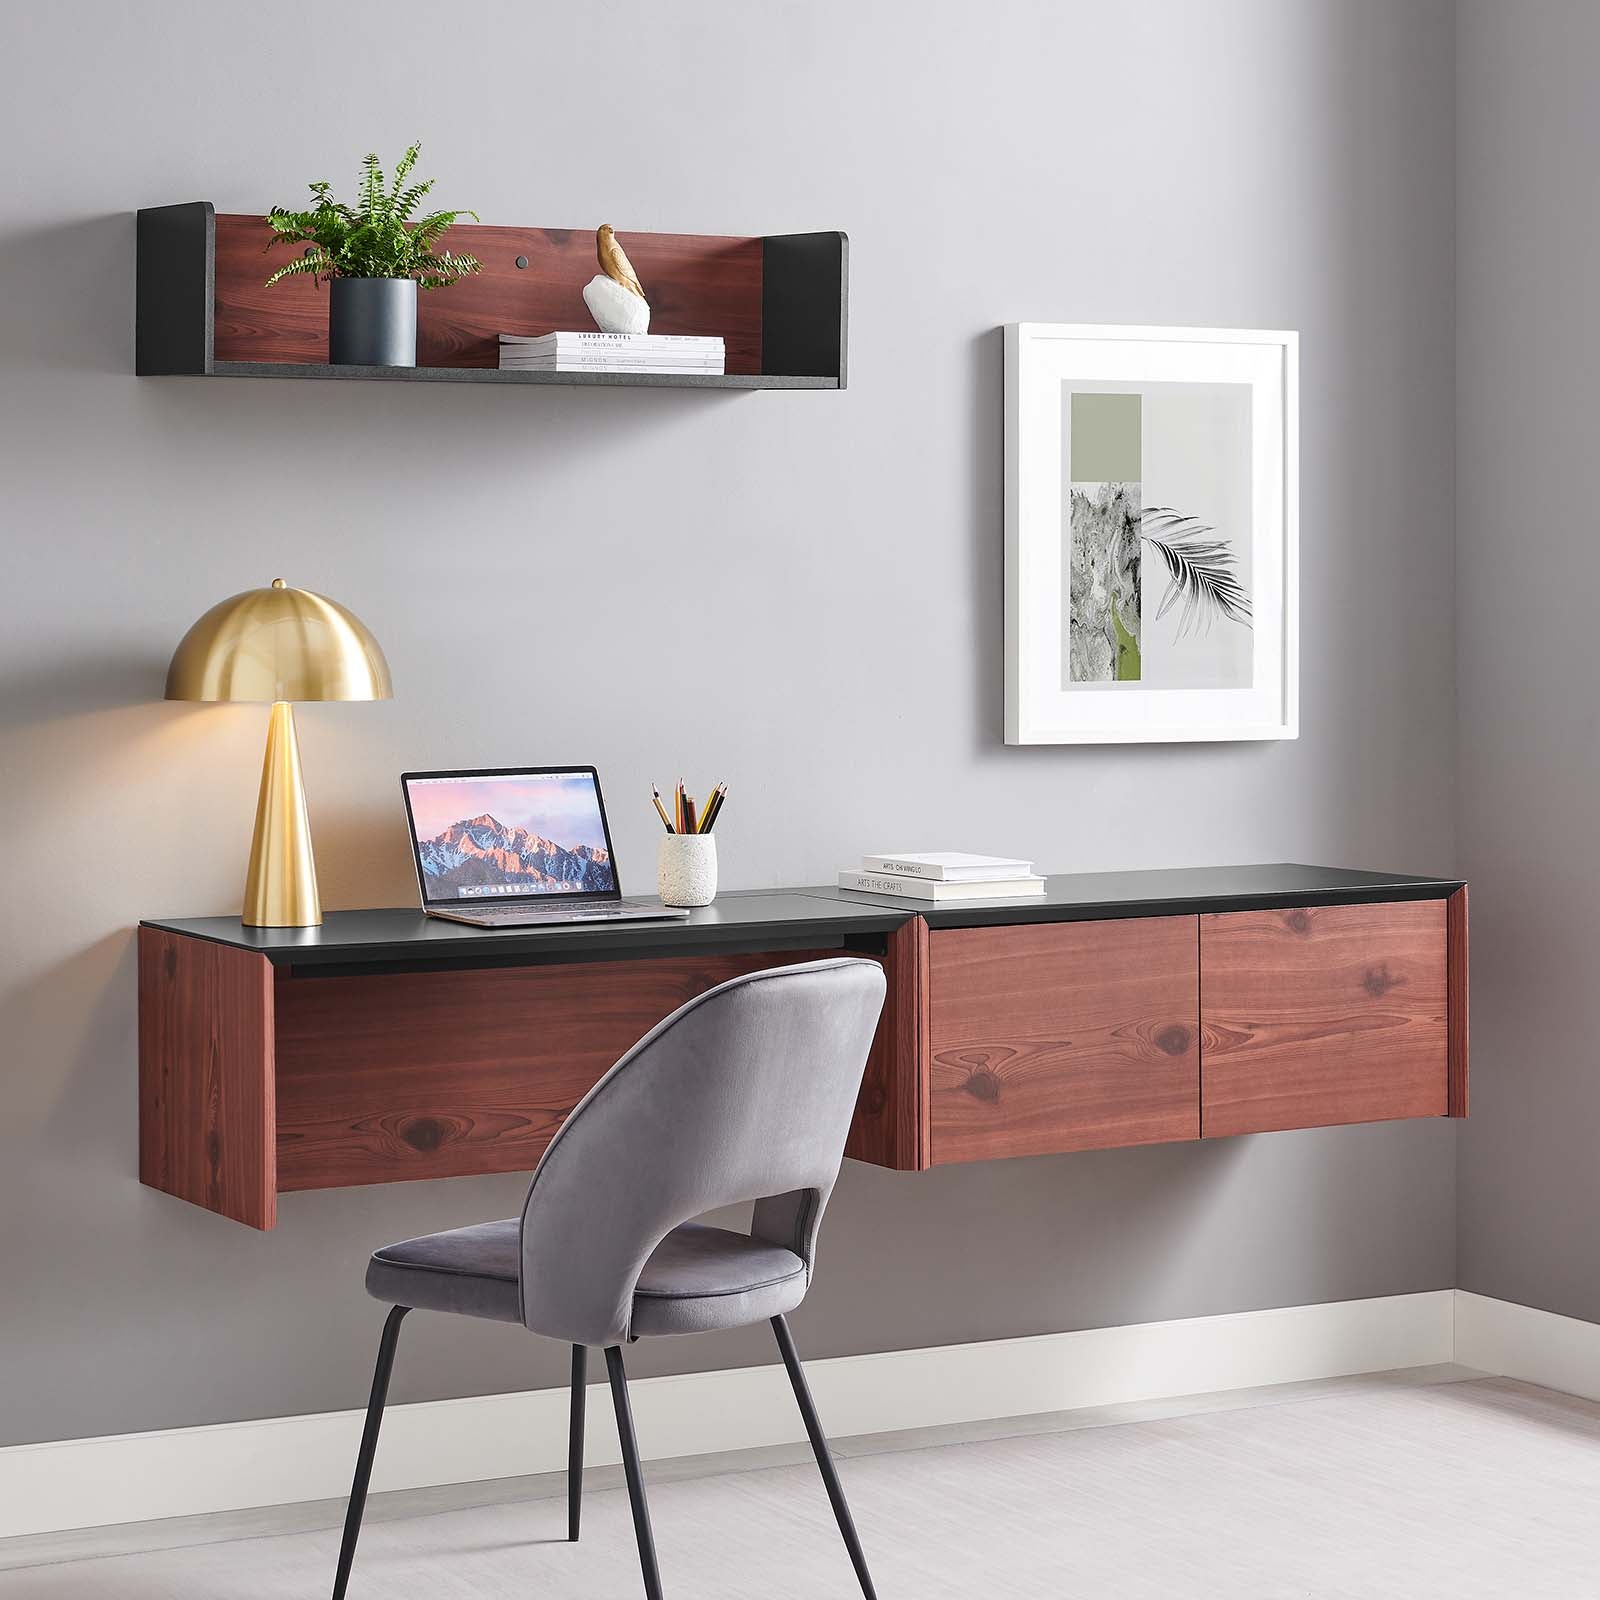 Kinetic 38" Wall-Mount Office Desk With Cabinet and Shelf - East Shore Modern Home Furnishings